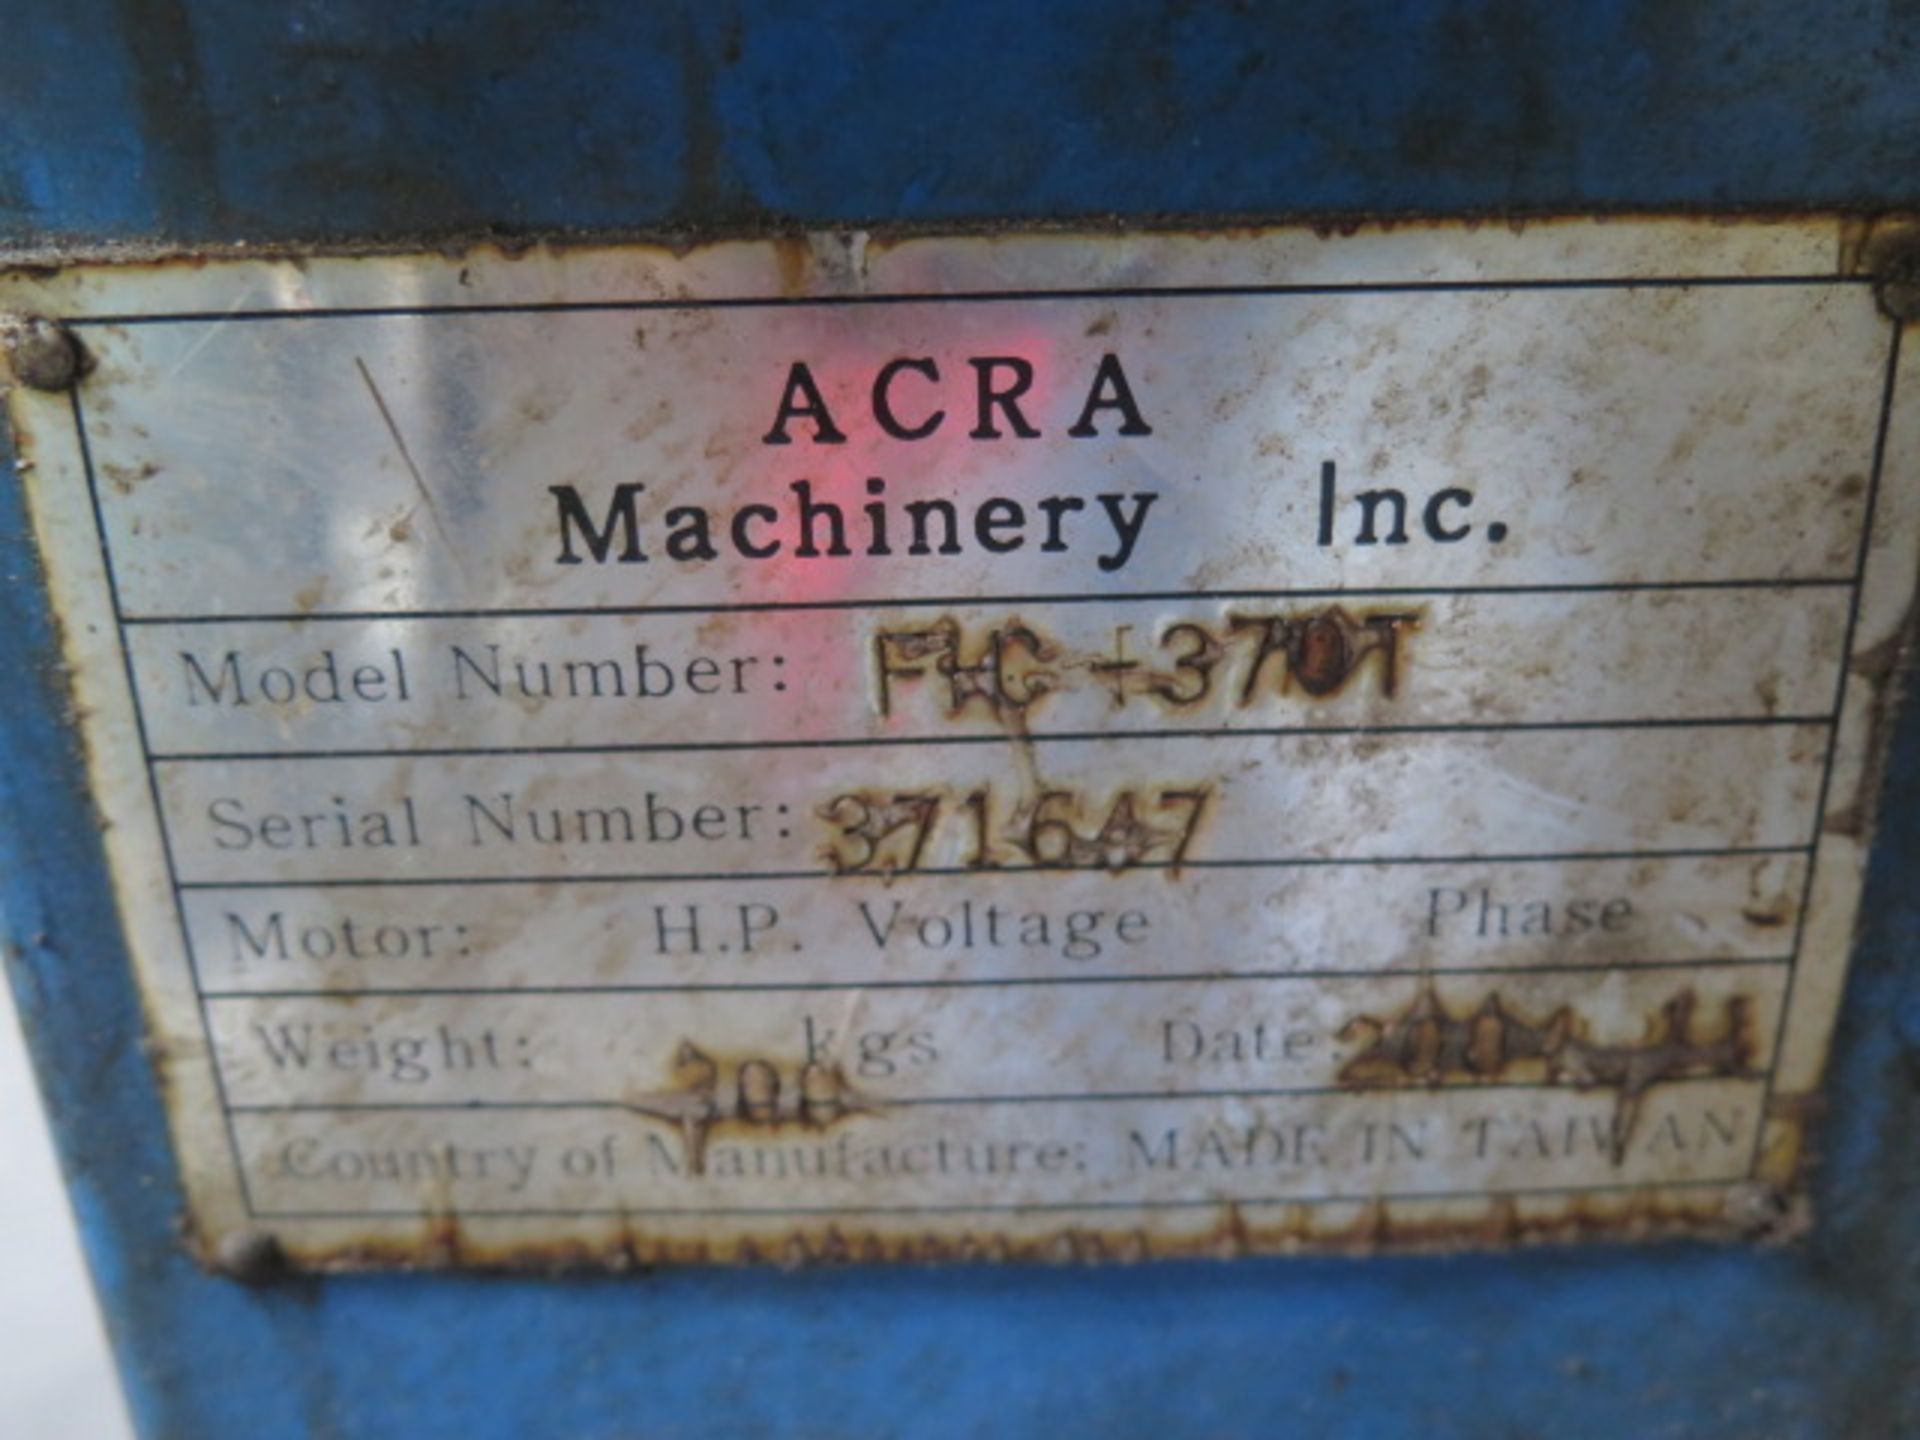 Acra FHC-370T Miter Cold Saw s/n 371647 w/ 2-Speeds, Manual Clamping (AS-IS NO WARRANTY) - Image 8 of 8